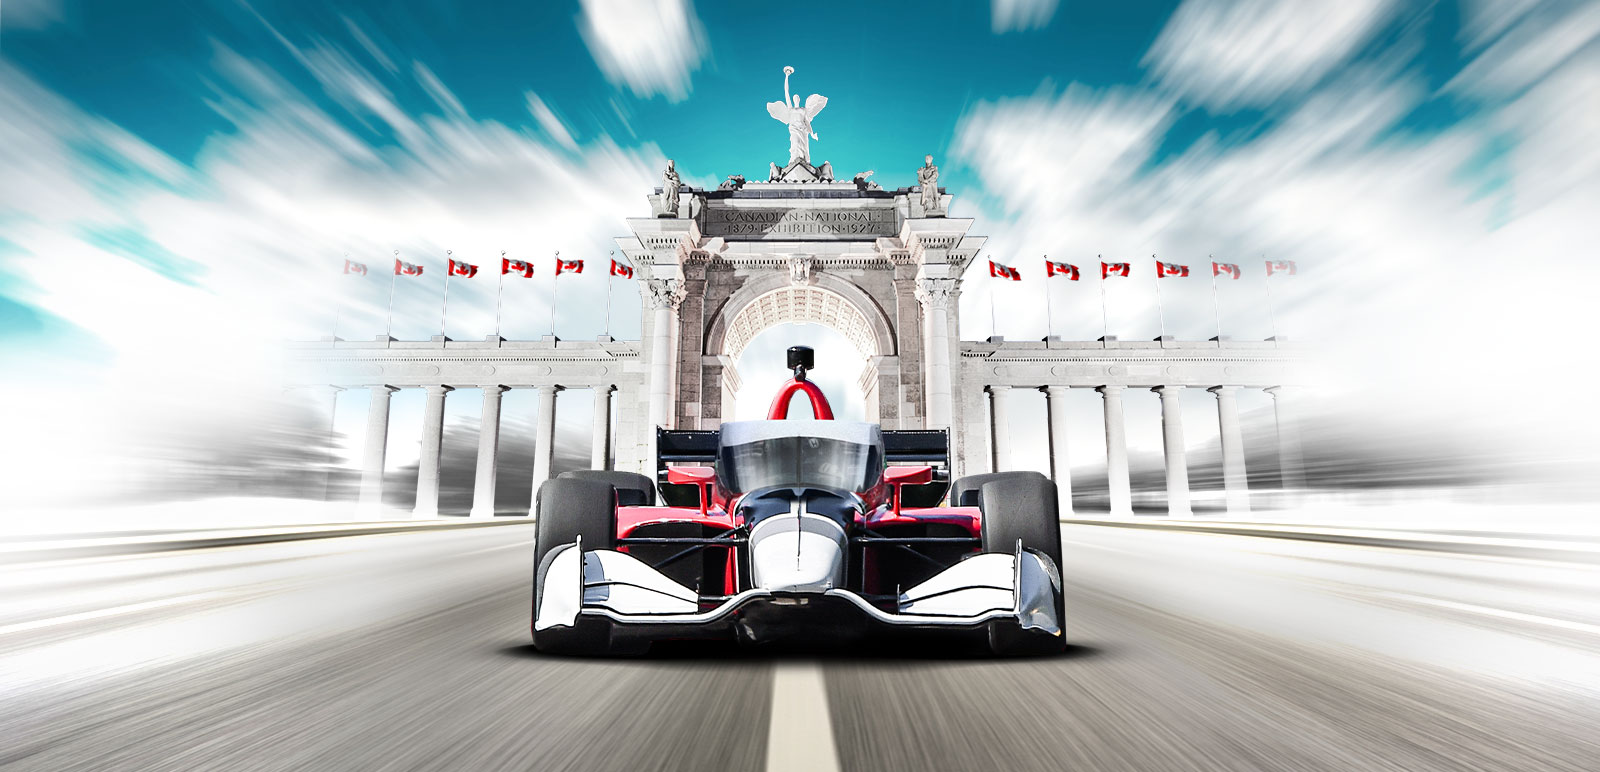 After a two-year hiatus, the Honda Indy Toronto